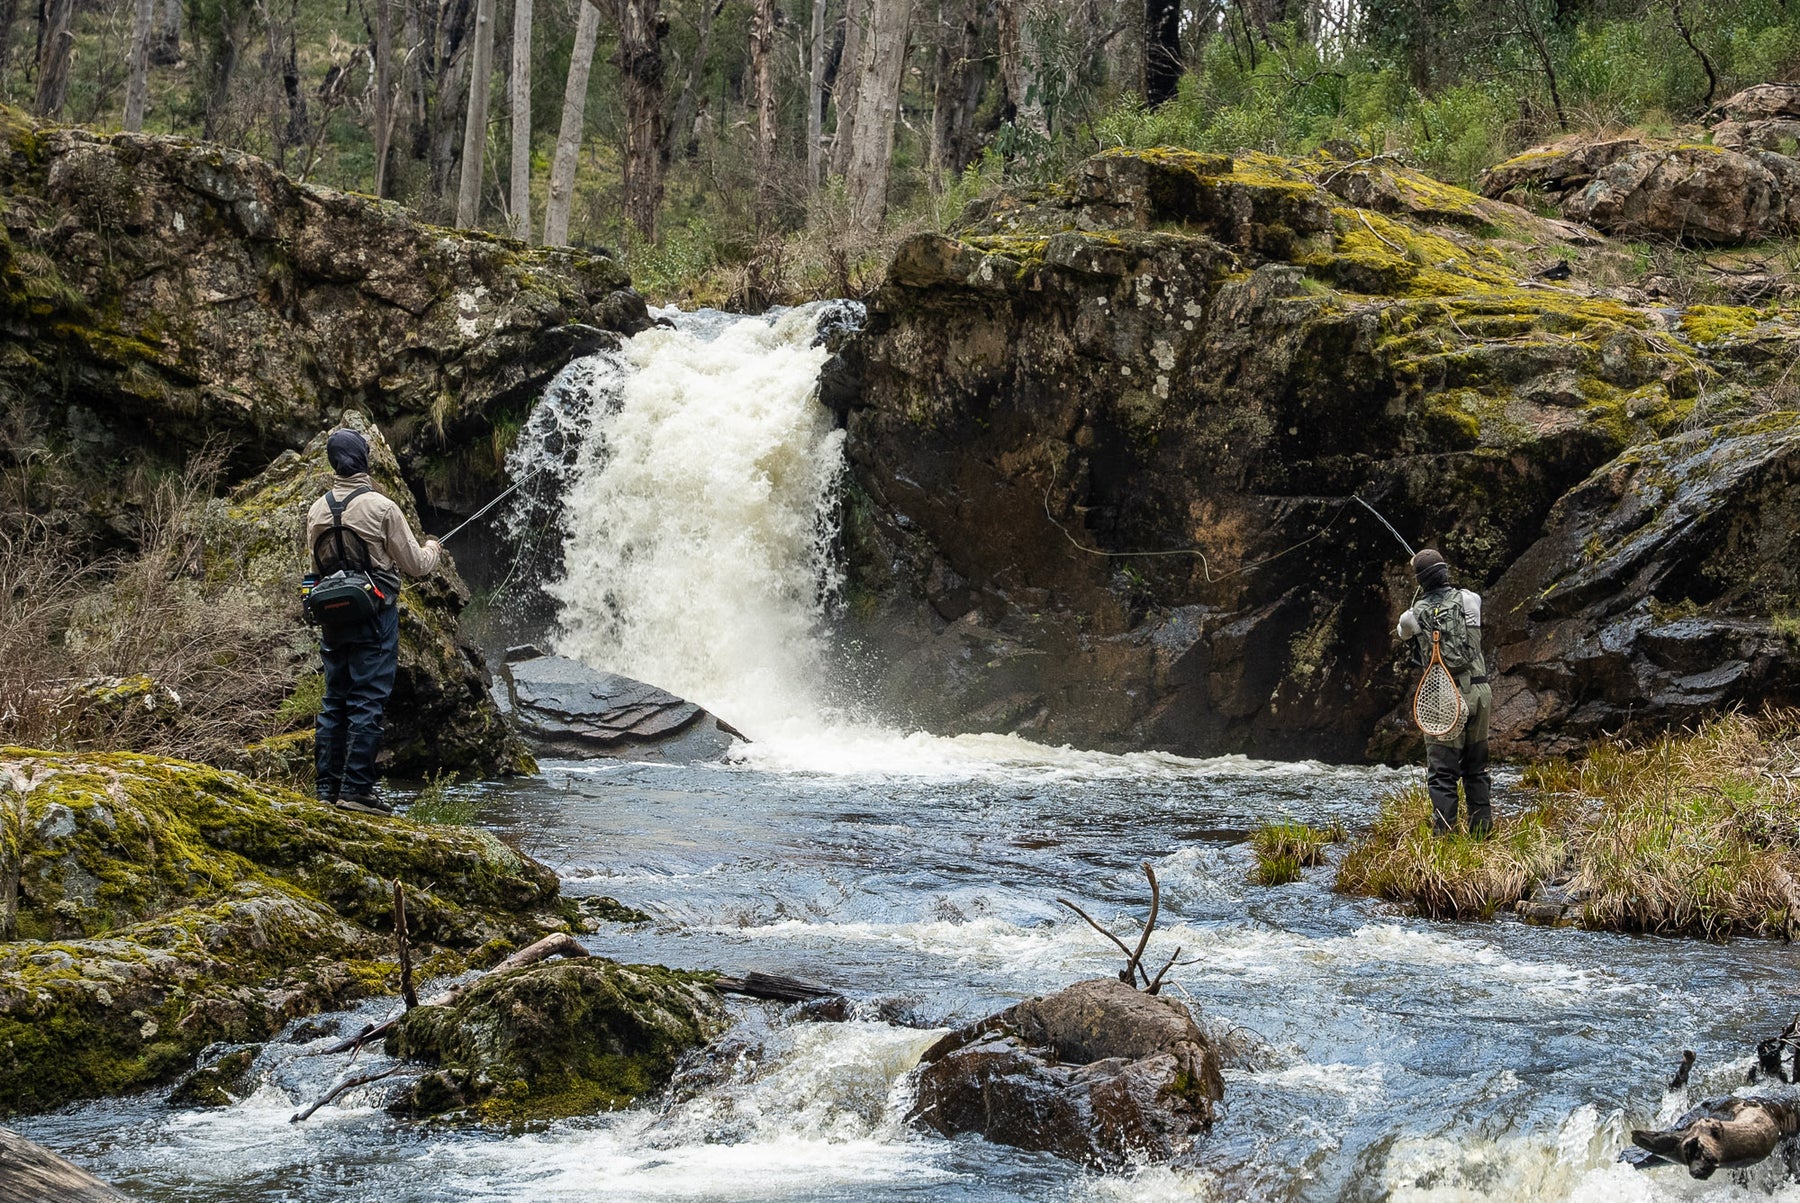 Pat and Dom fly fishing near a waterfall on Yarrangobilly River in Kosciuszko National Park